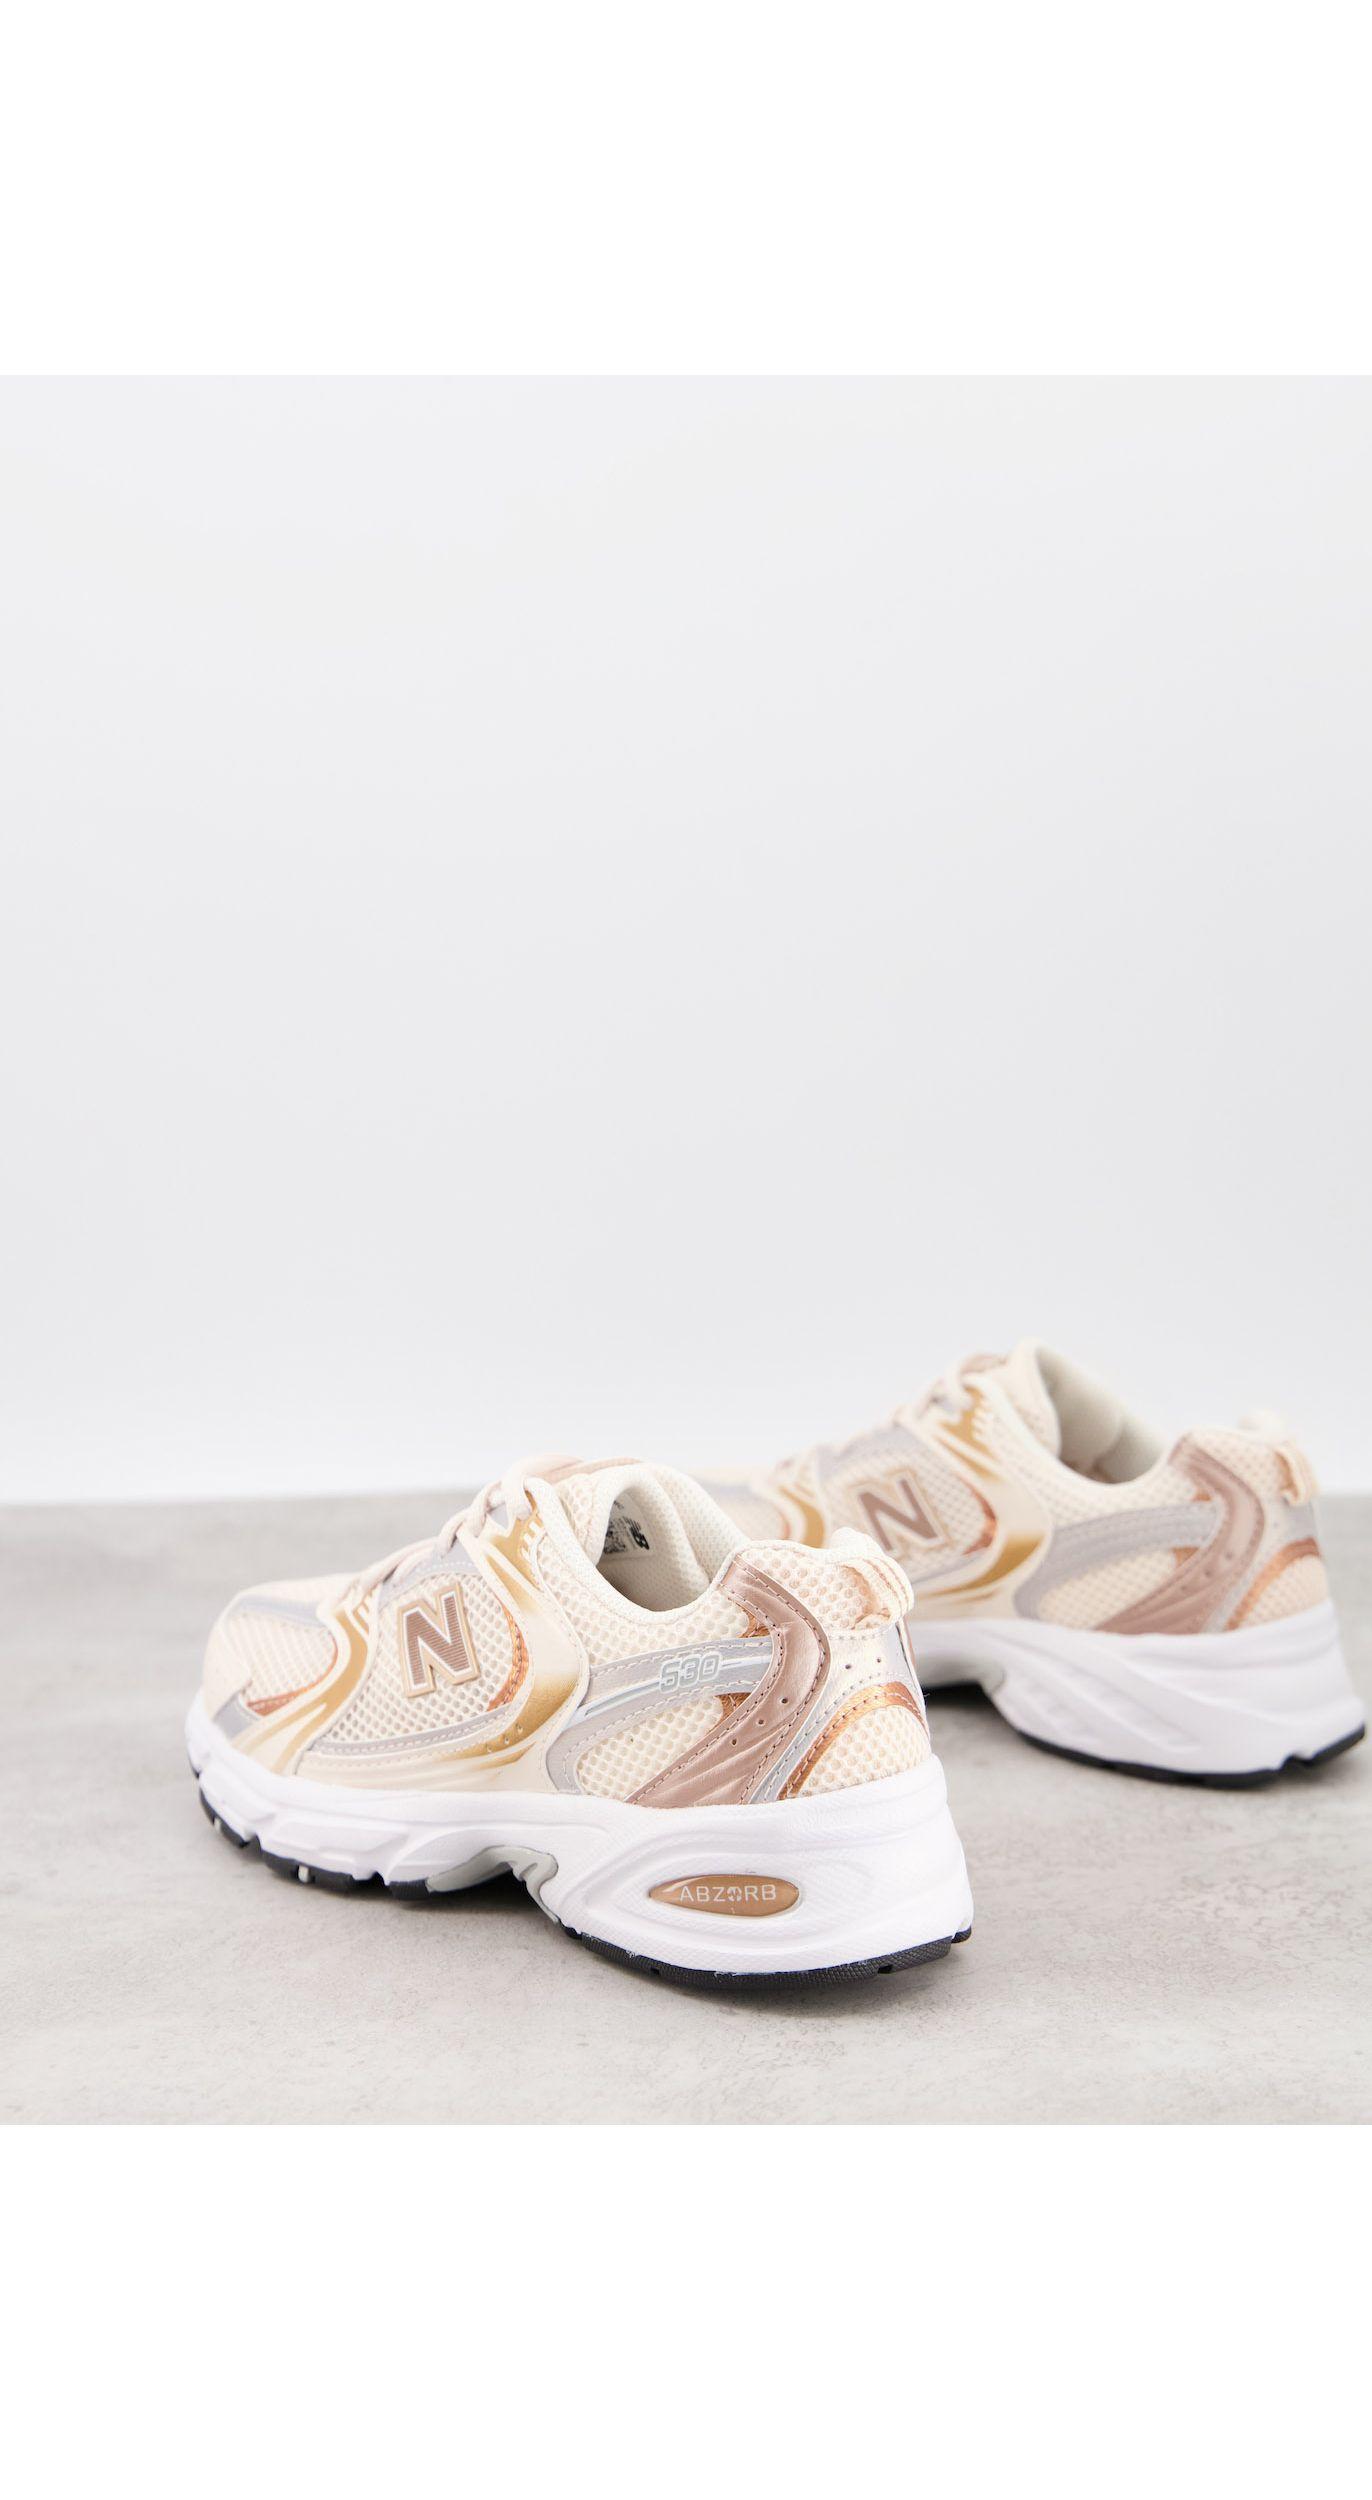 New Balance Rubber 530 Metallic Trainers in Pink | Lyst